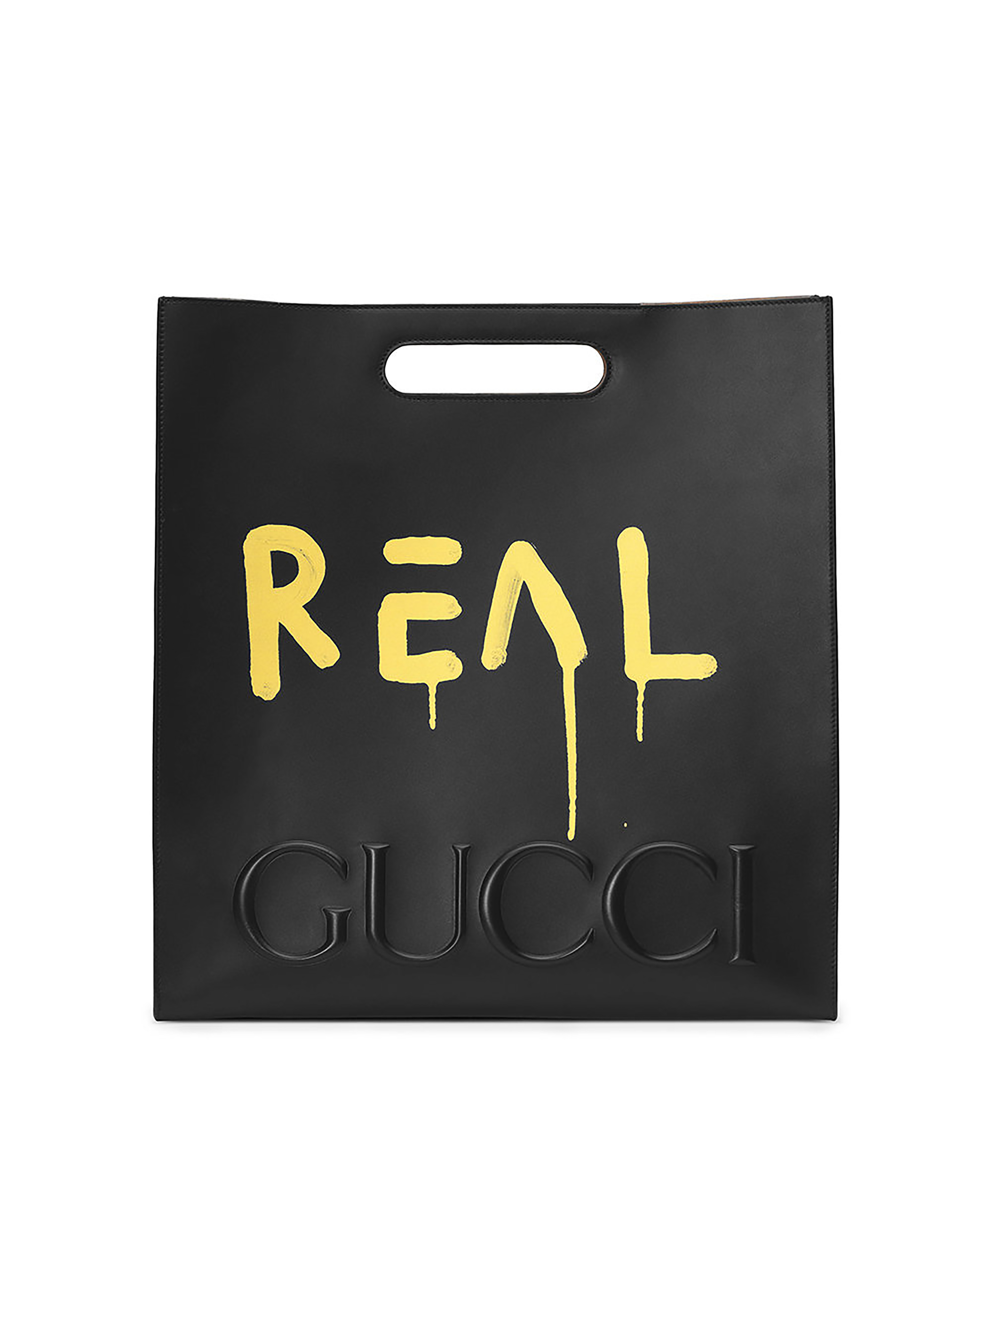 Farfetch Launches 90-Minute Delivery Service from Gucci Stores in Ten Cities Across Four Continents